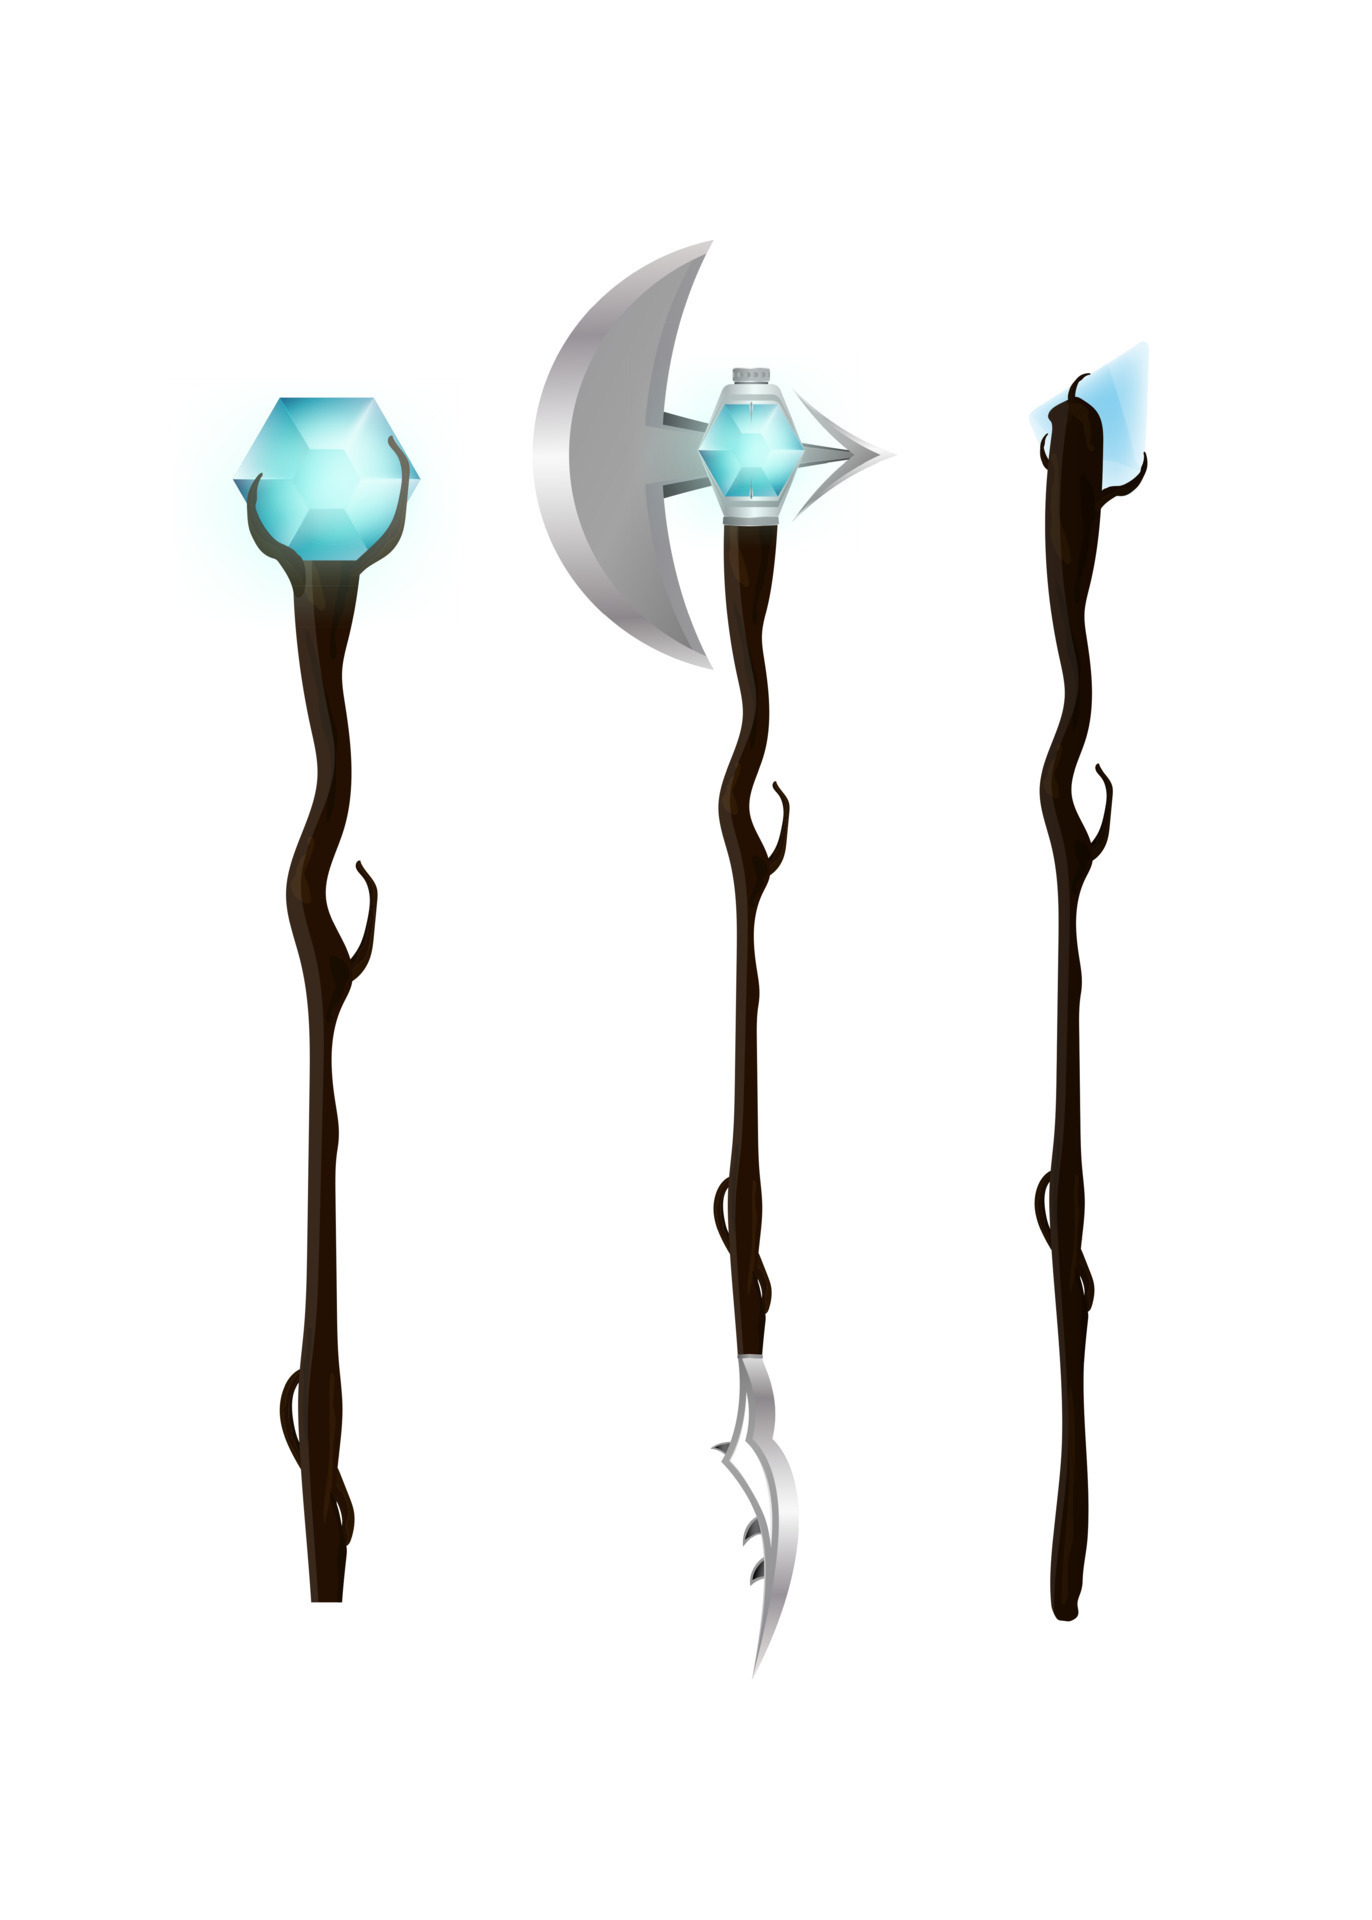 Magic staff or walking stick with crystal in cartoon style. Vector